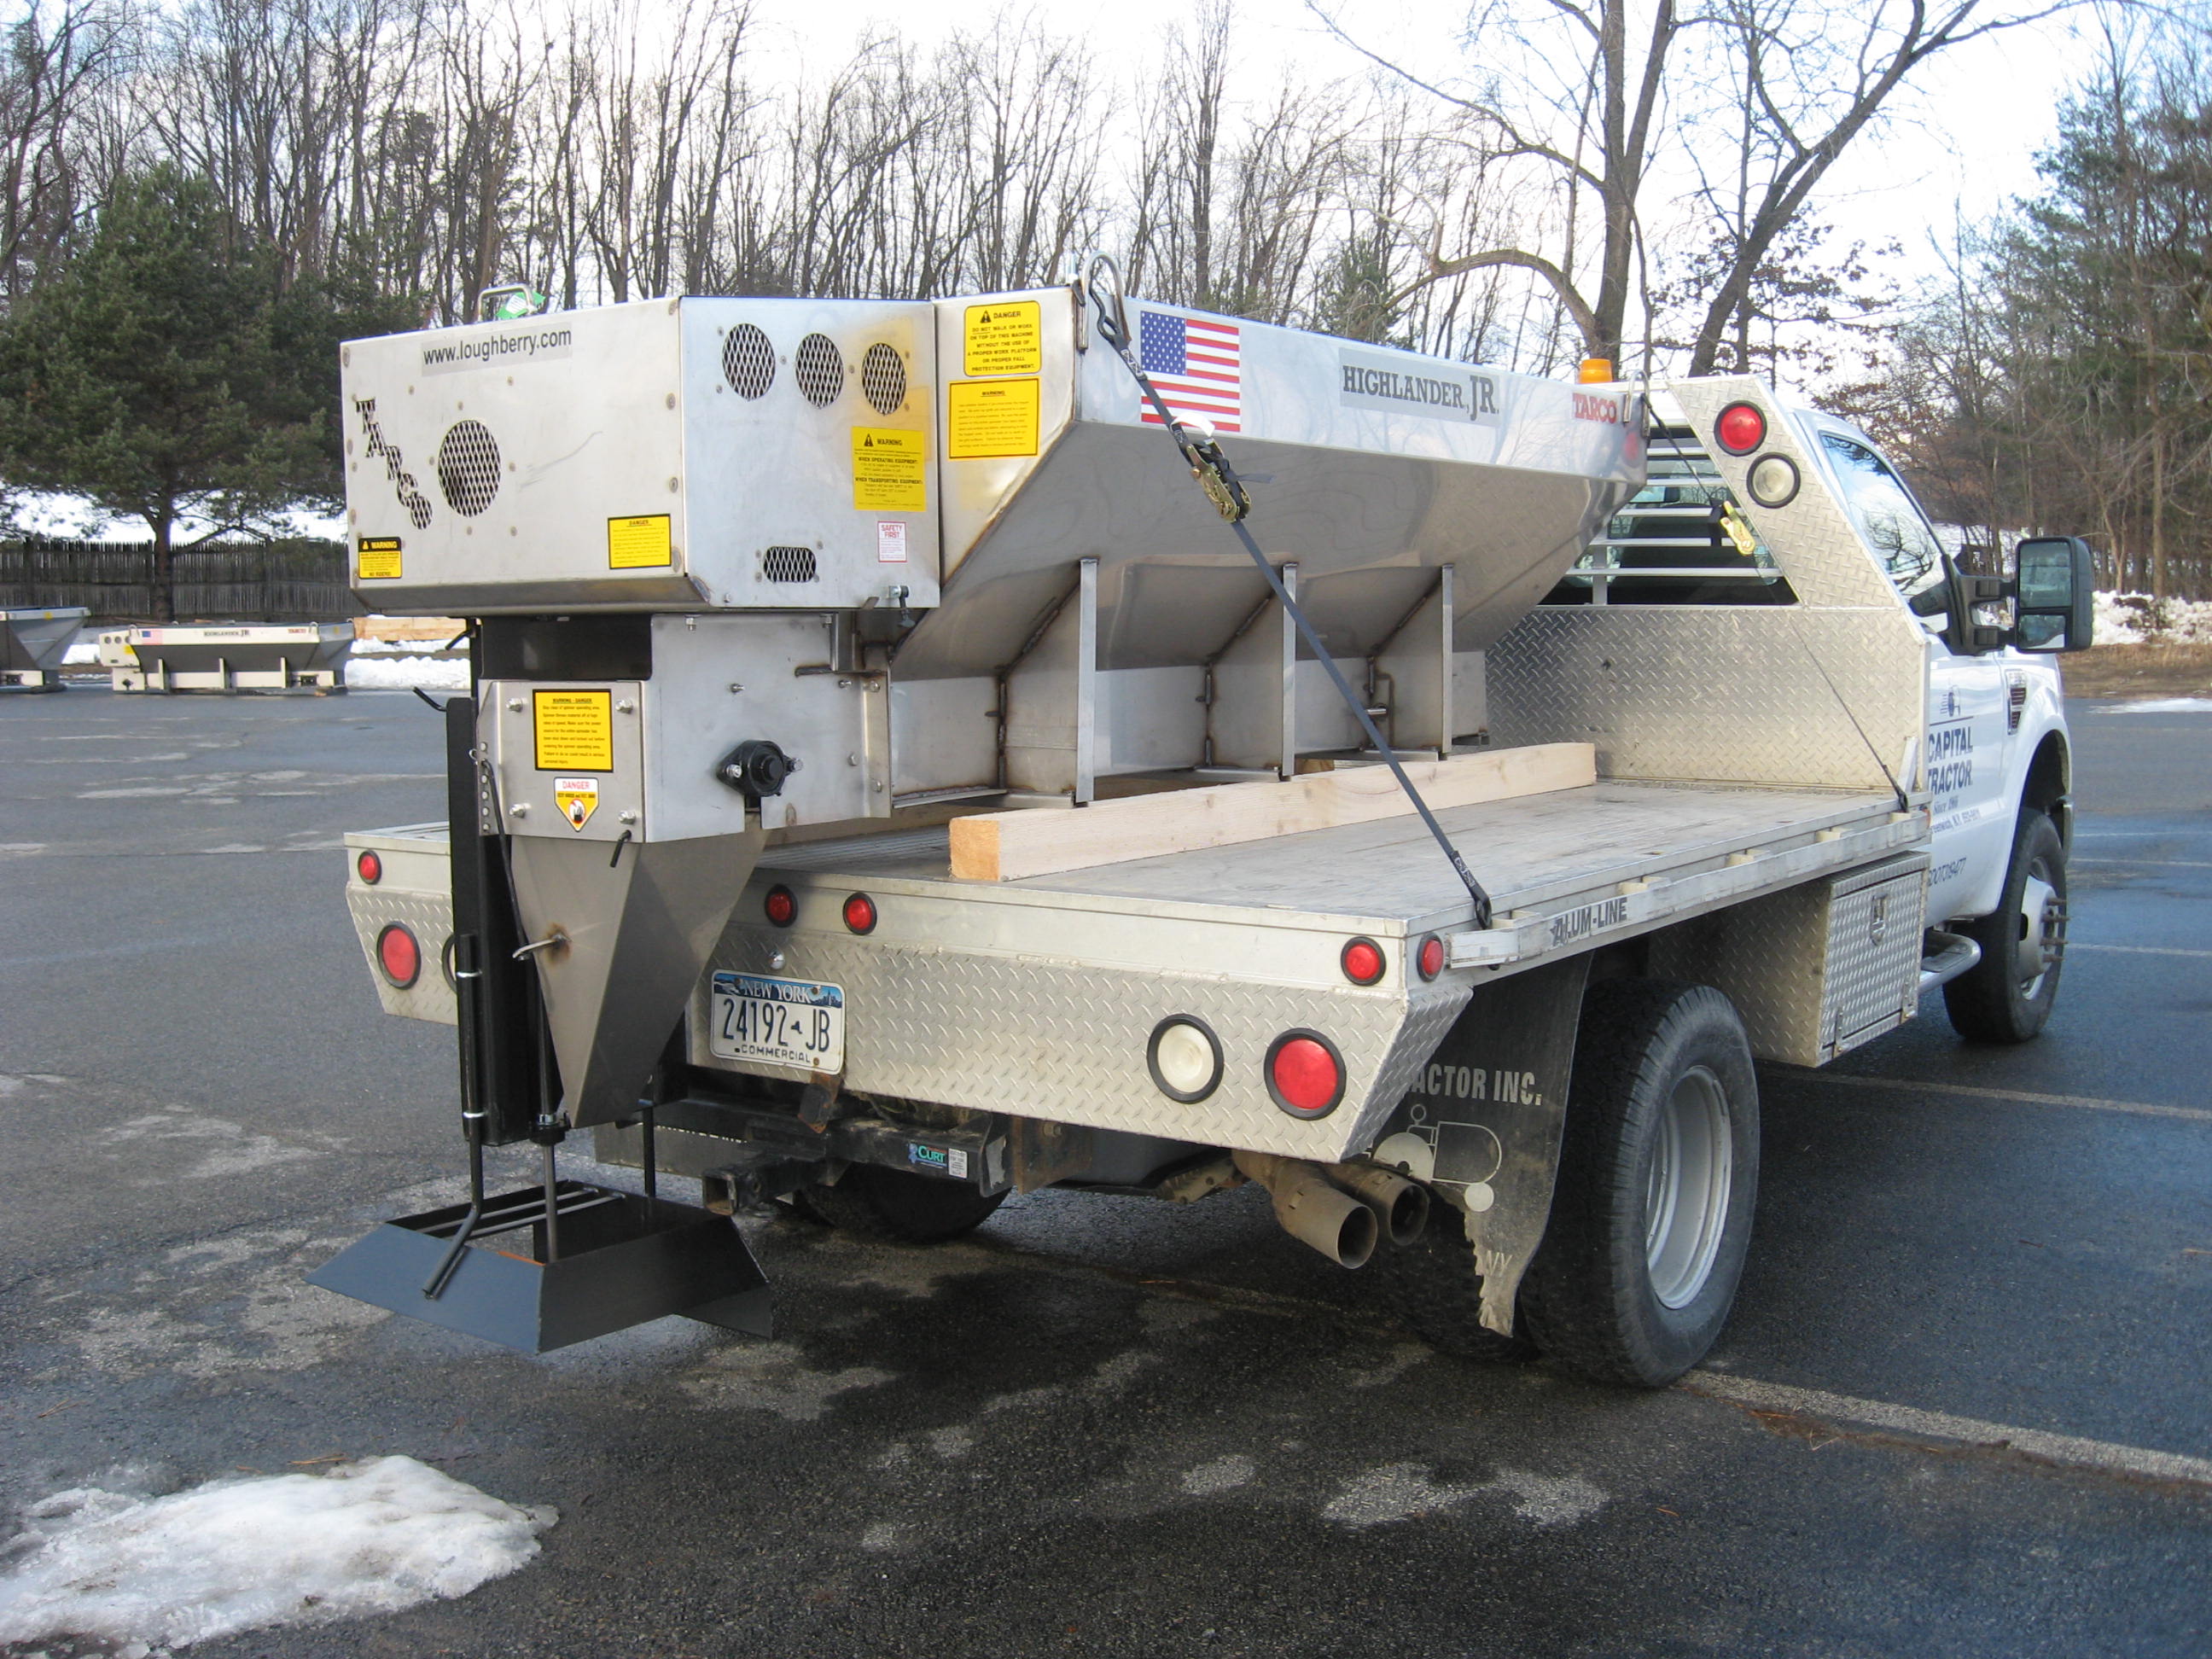 All season dump bodies, tire recycling machines, vacuum leaf loader boxes, salt and sand spreaders, v-box spreaders, and other municipal equipment manufactured by Loughberry Mfg. Corp. under the Tarco brand.